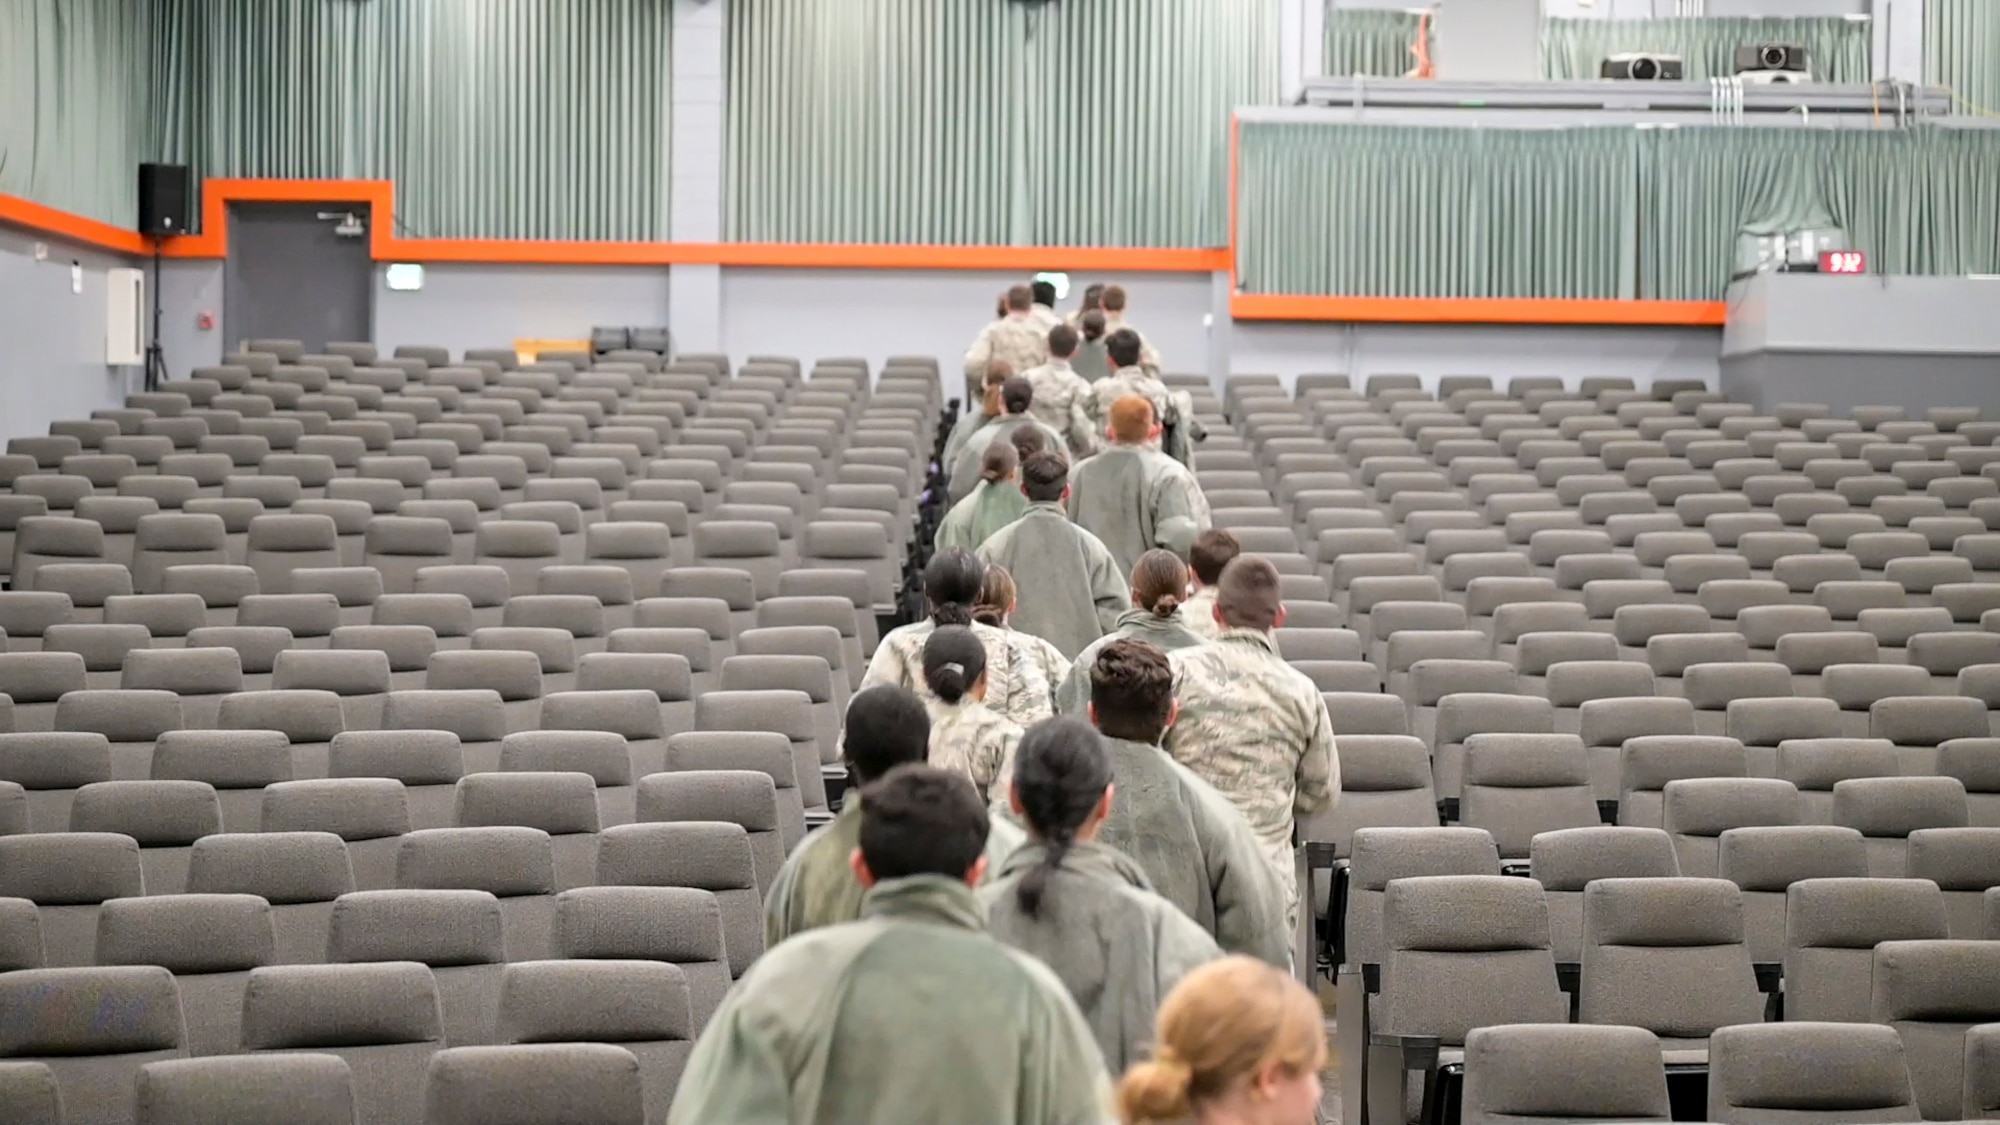 About 100 JROTC cadets from Desert High School came to learn the way of the Defender from the 412th Security Forces Squadron at Edwards Air Force Base, California. These cadets may then graduate high school and move on to the grueling task of basic training.